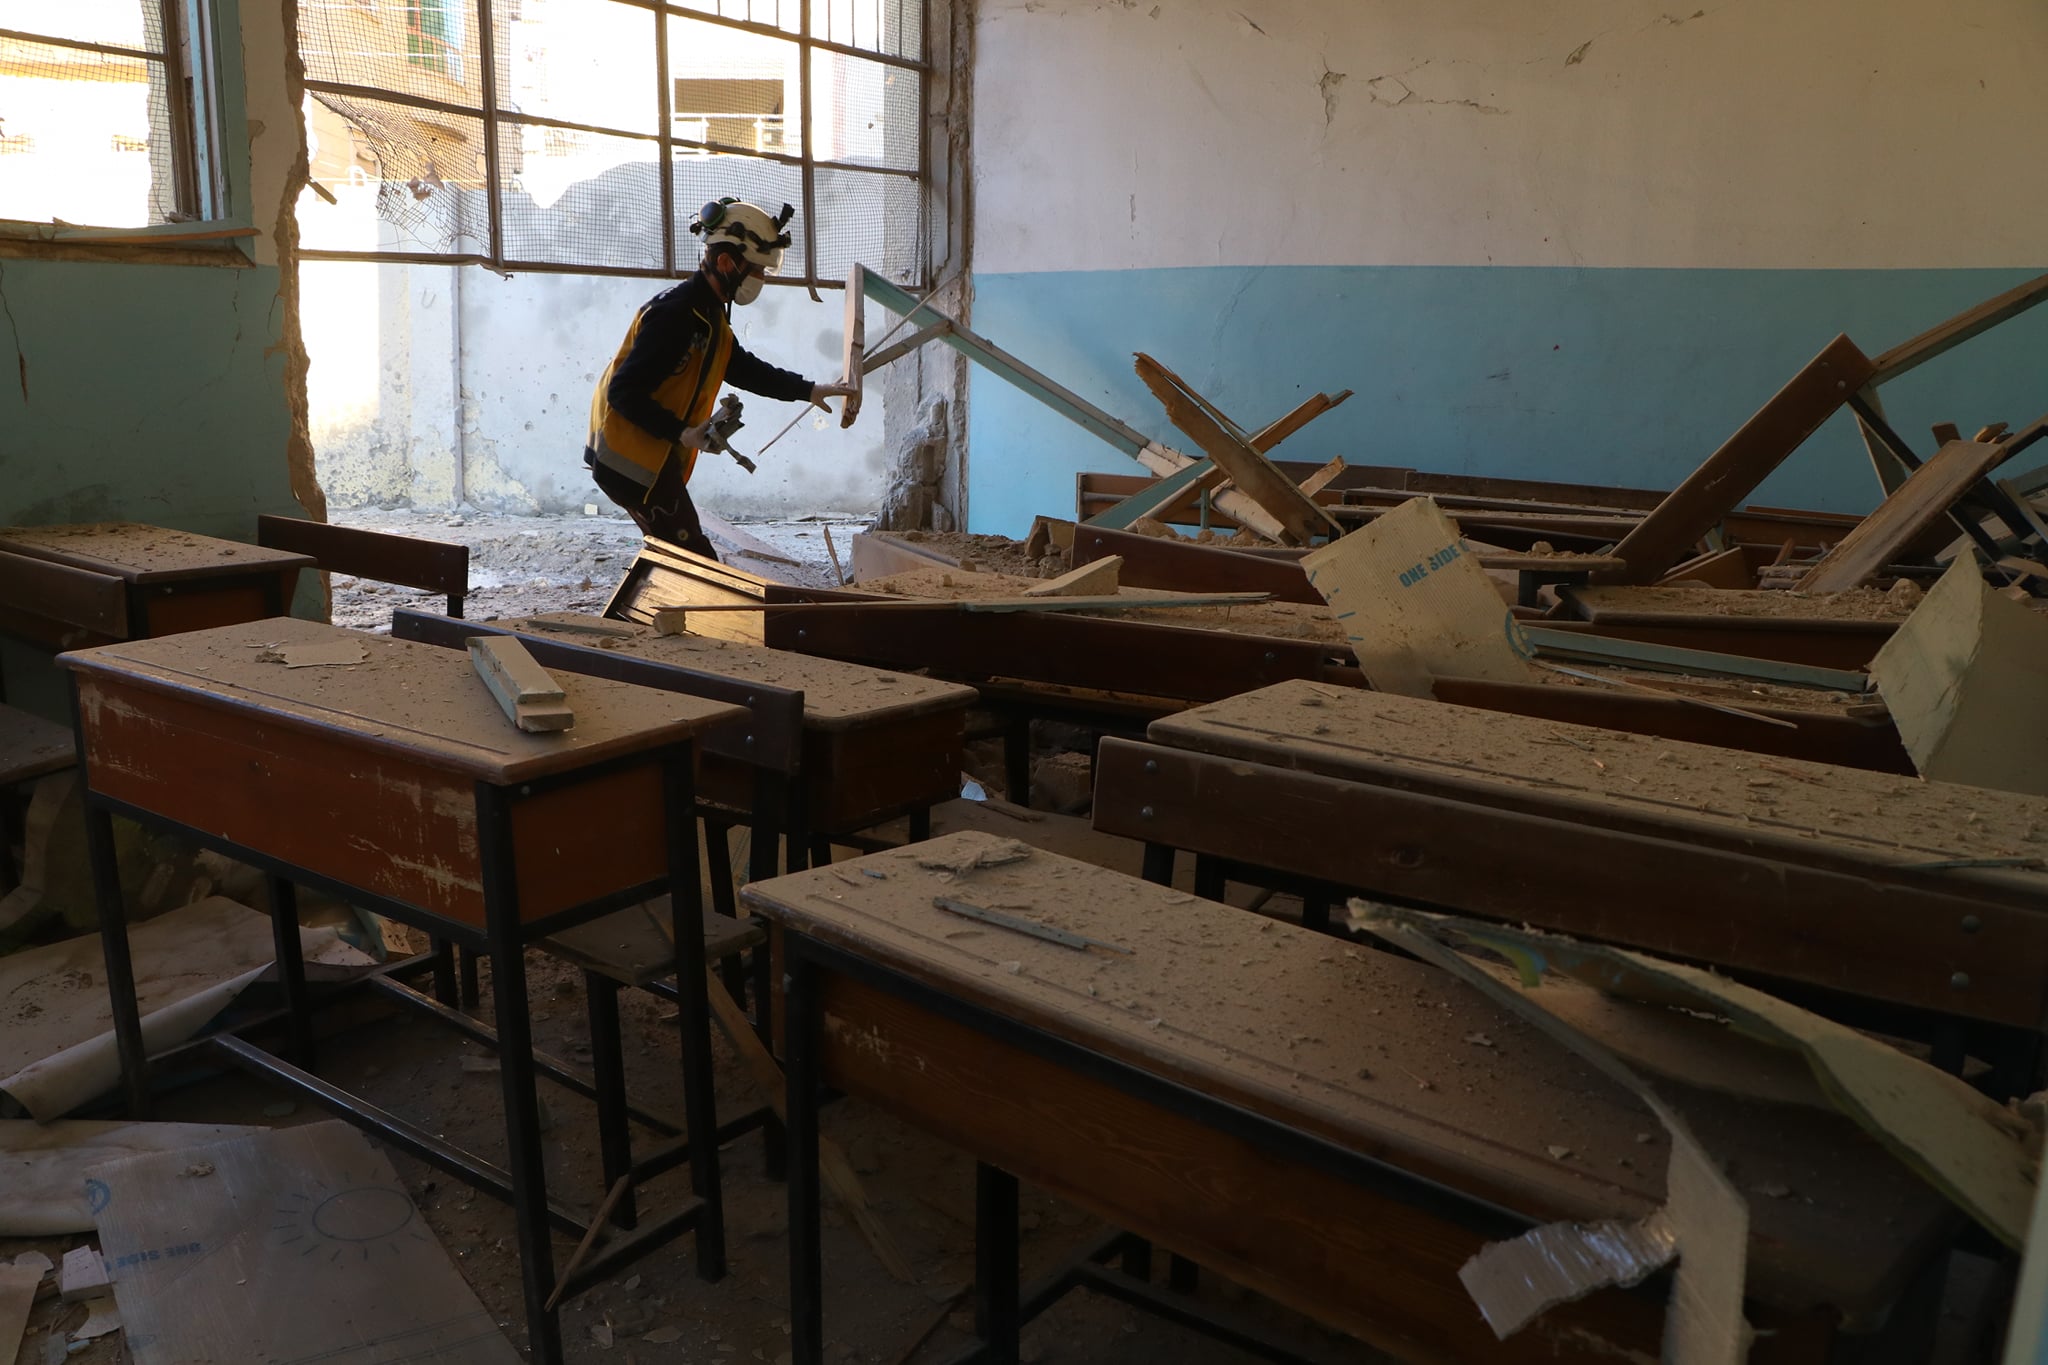 Attack on a school in Afrin in Aleppo in Syria 20-1-2022